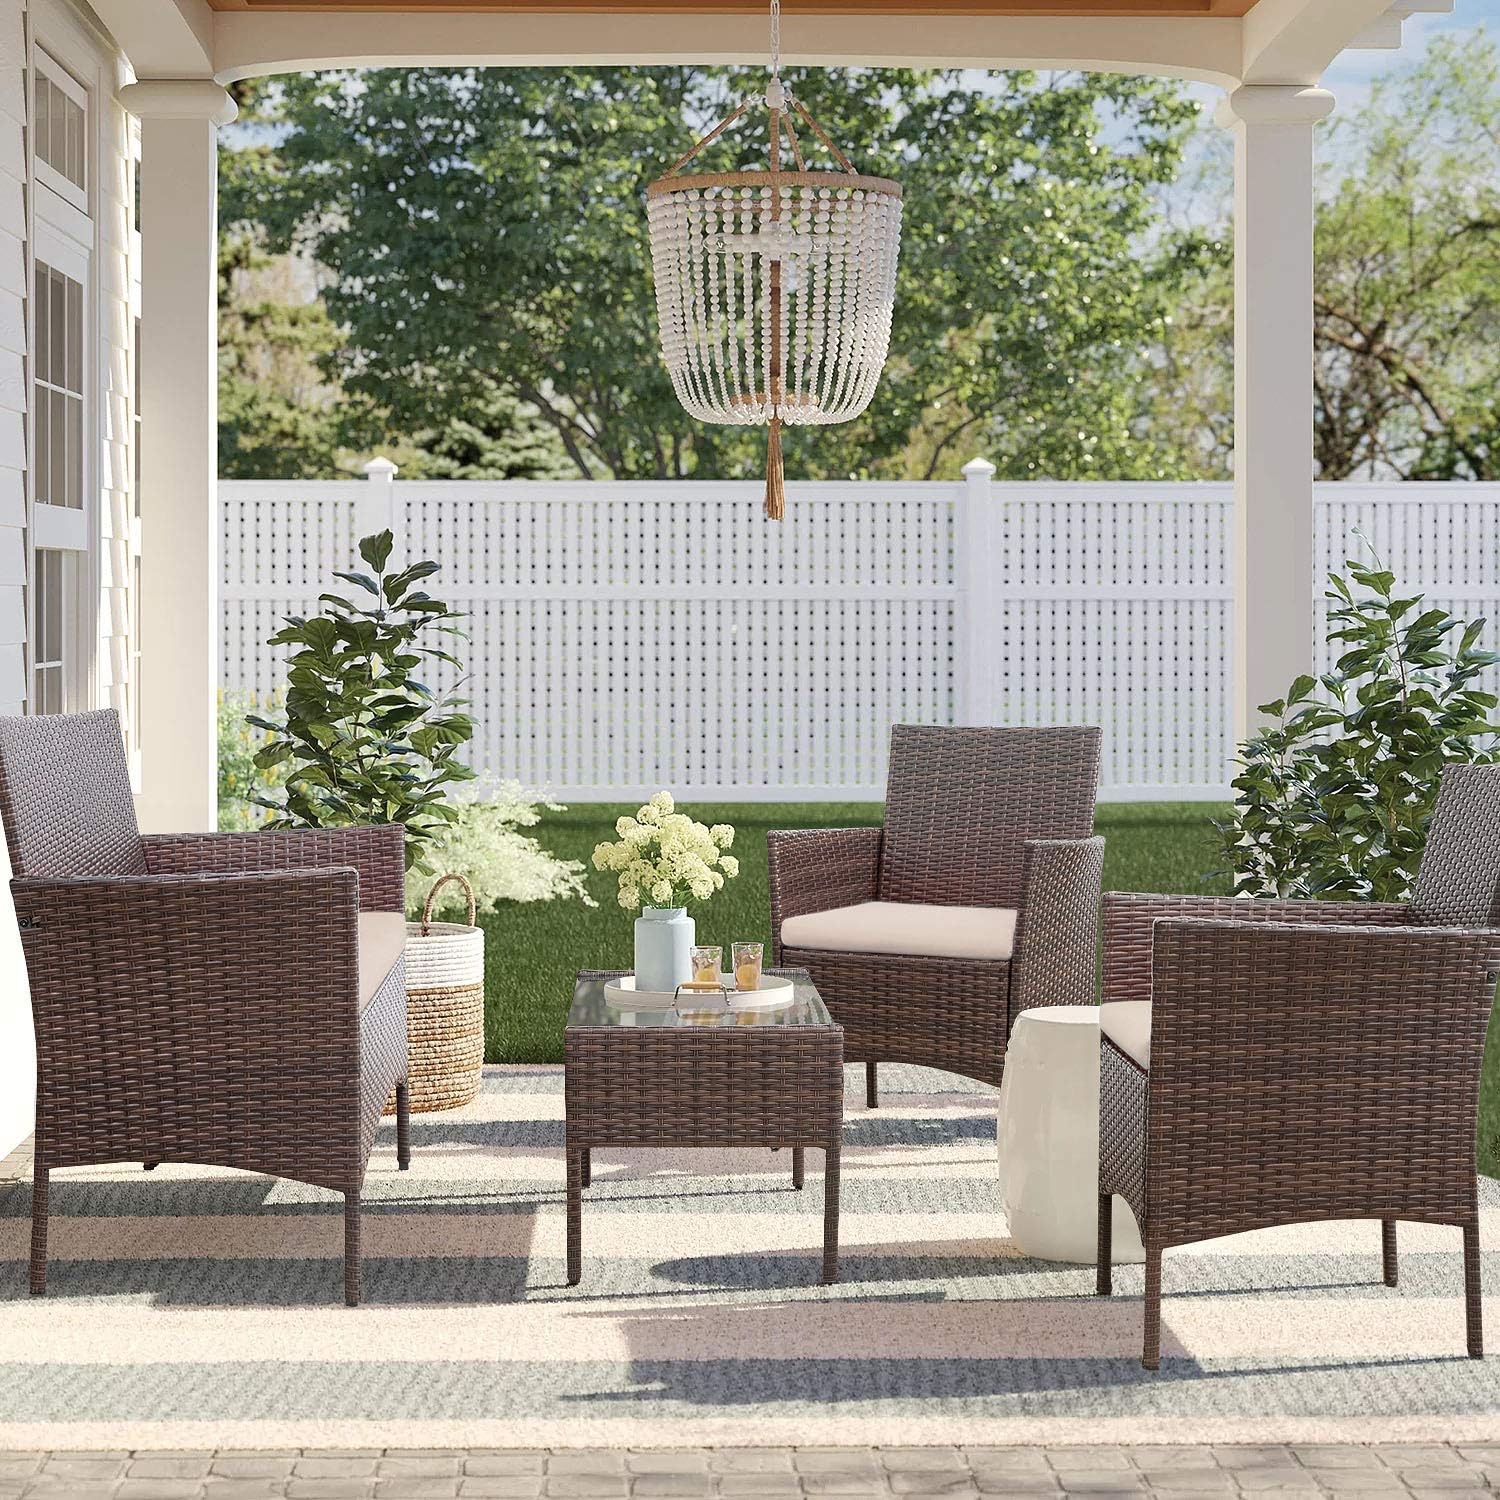 The Best Cheap Outdoor Patio Furniture Option: Homall Outdoor Porch Set